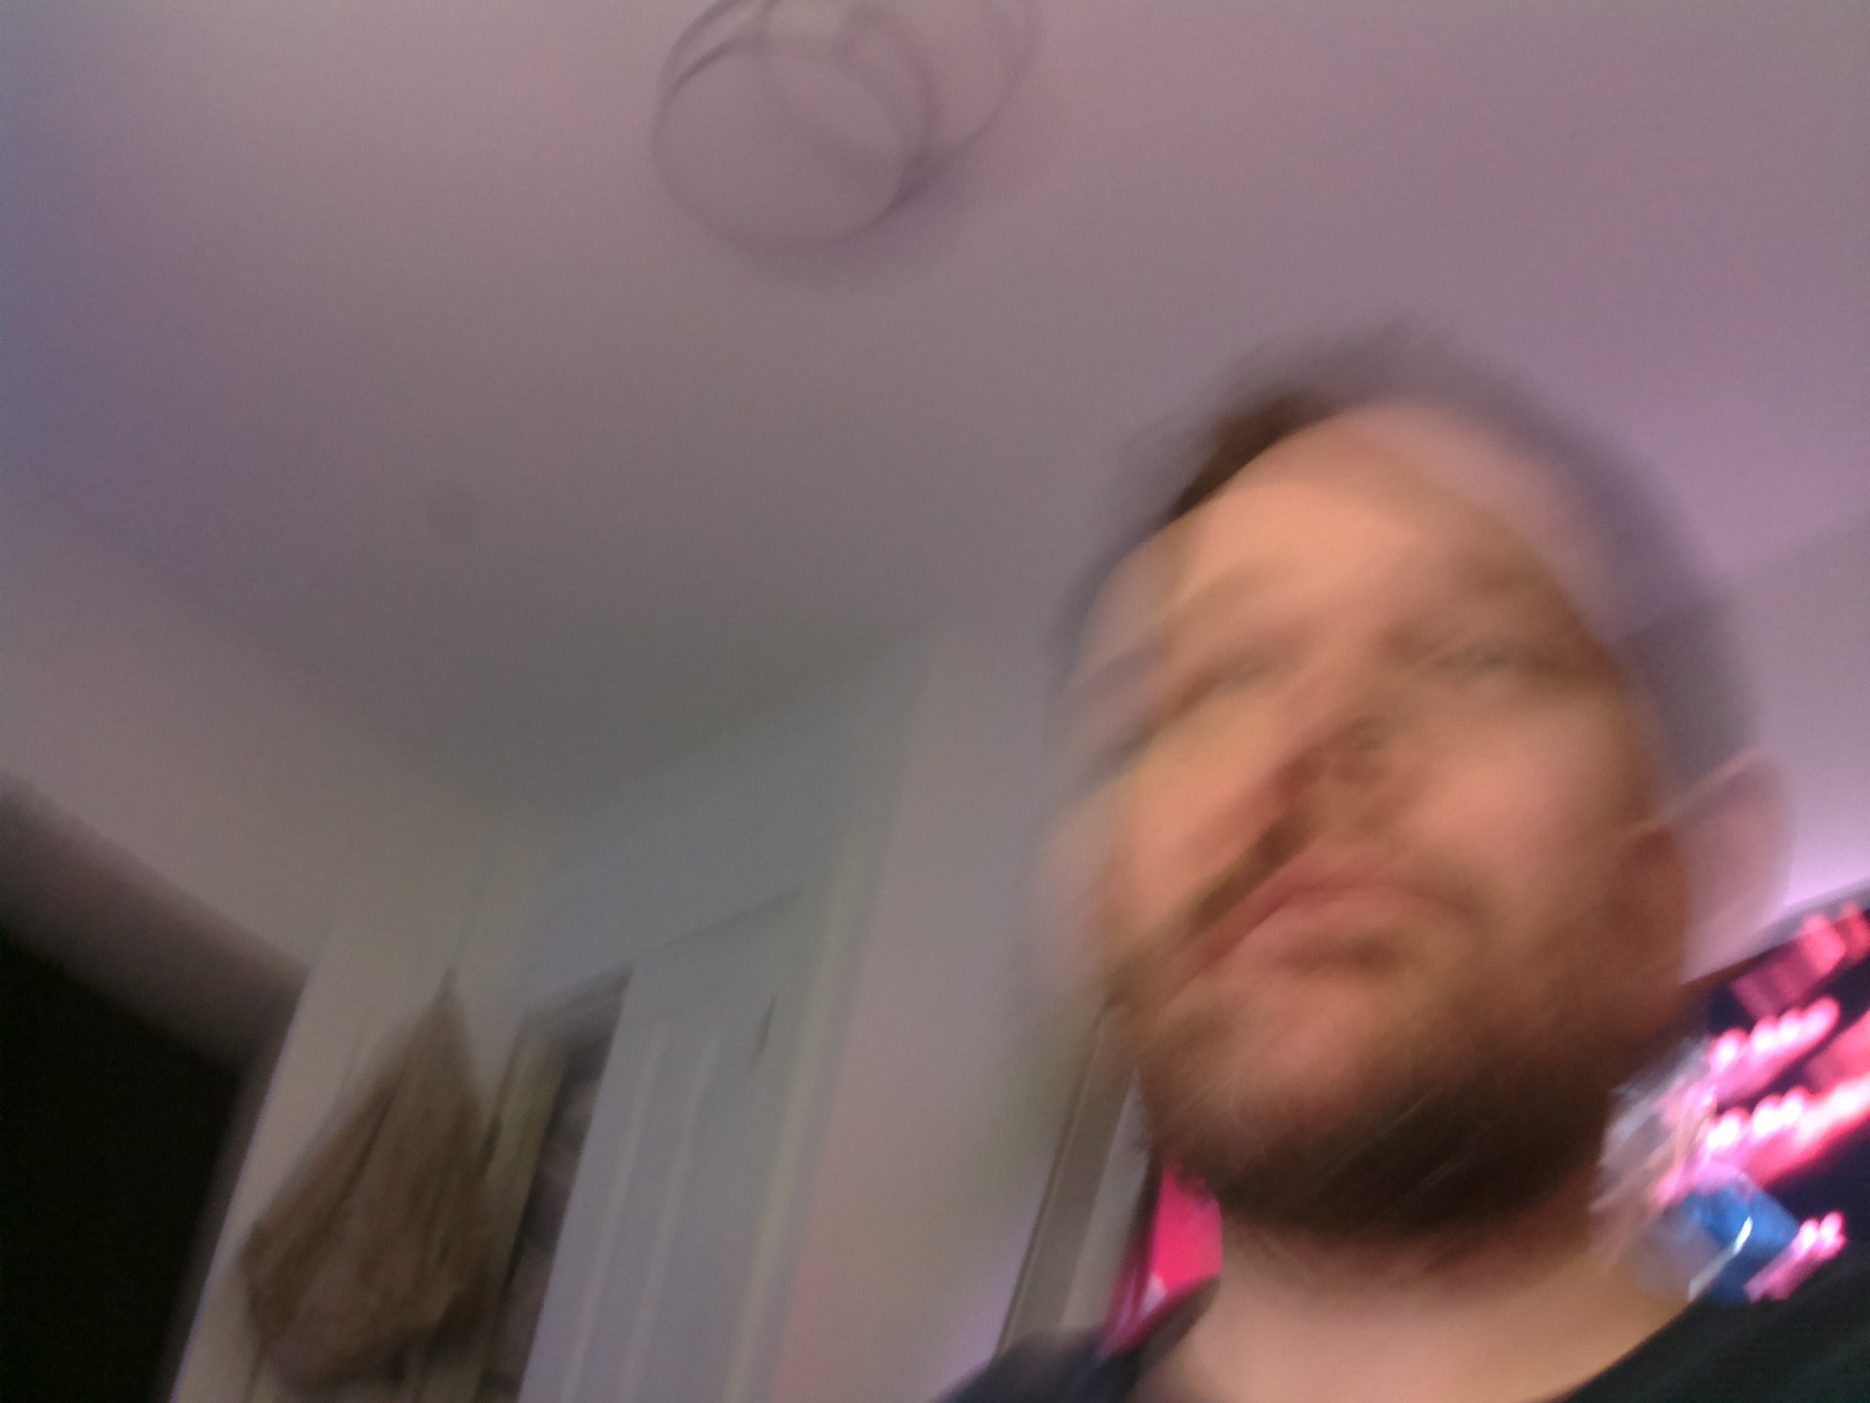 First image from my raspberry pi camera